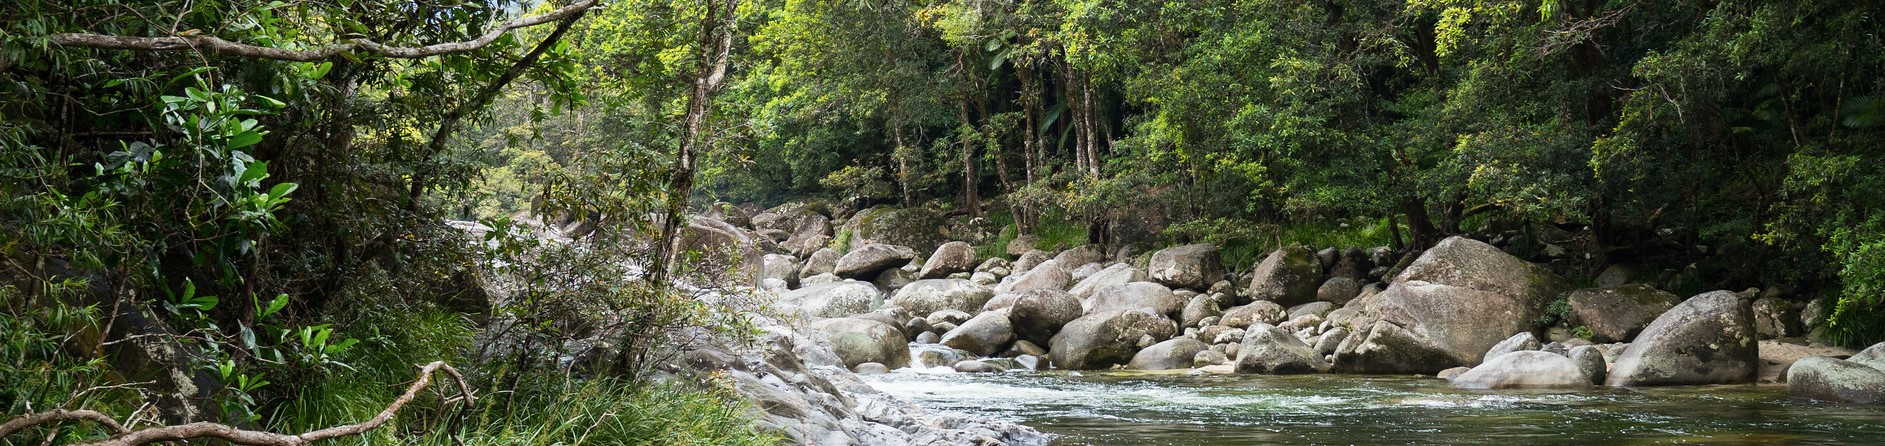 What state is the Daintree rainforest in?